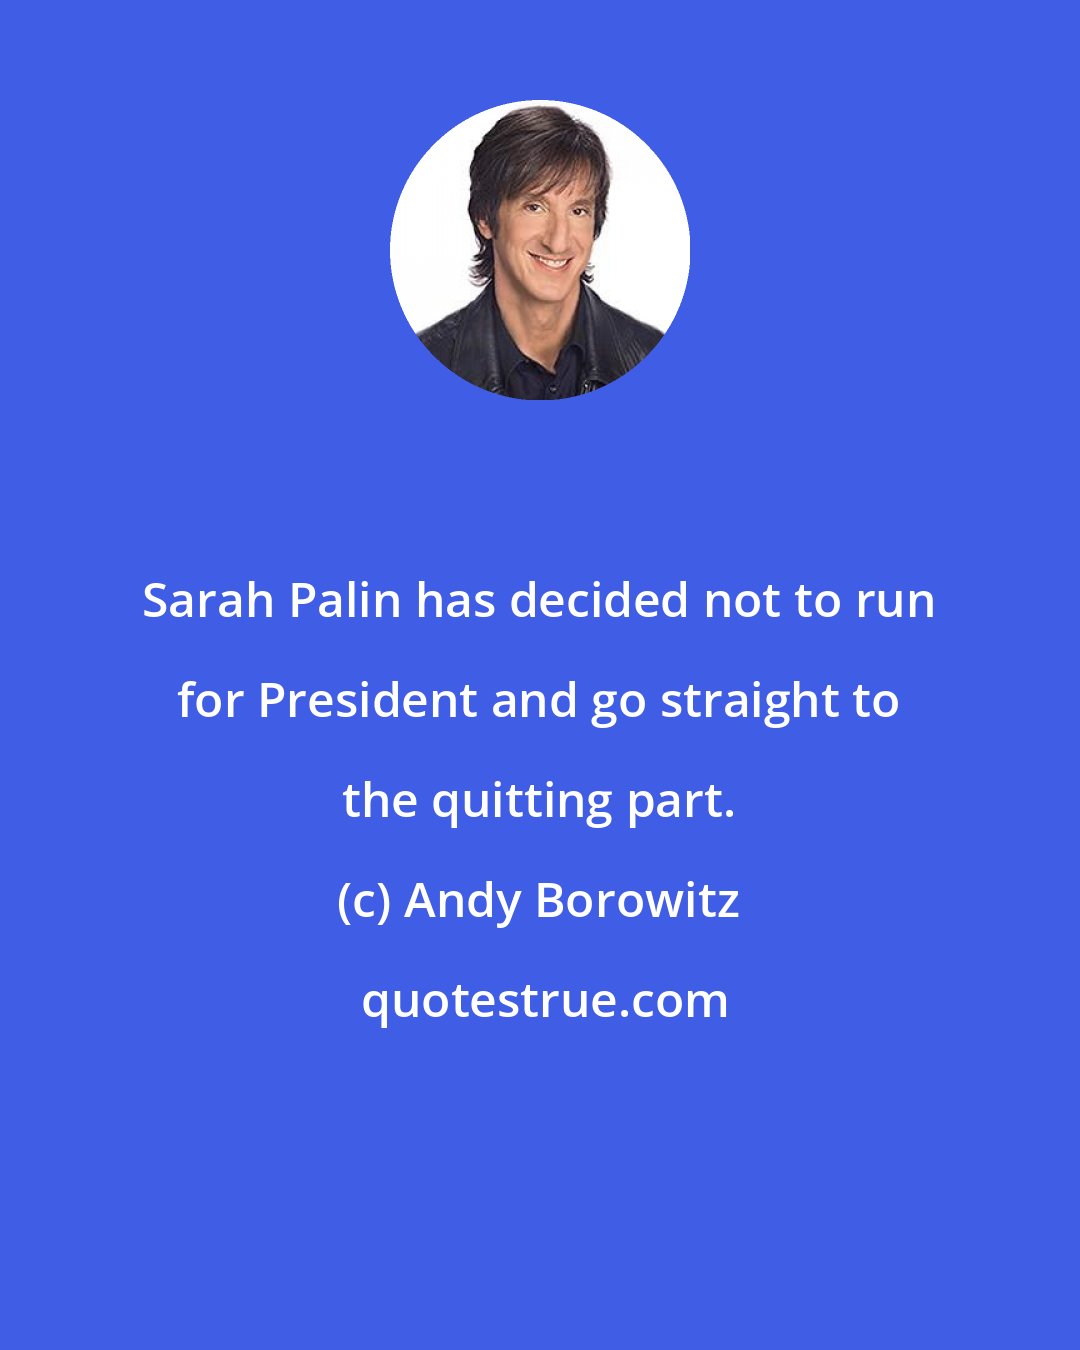 Andy Borowitz: Sarah Palin has decided not to run for President and go straight to the quitting part.